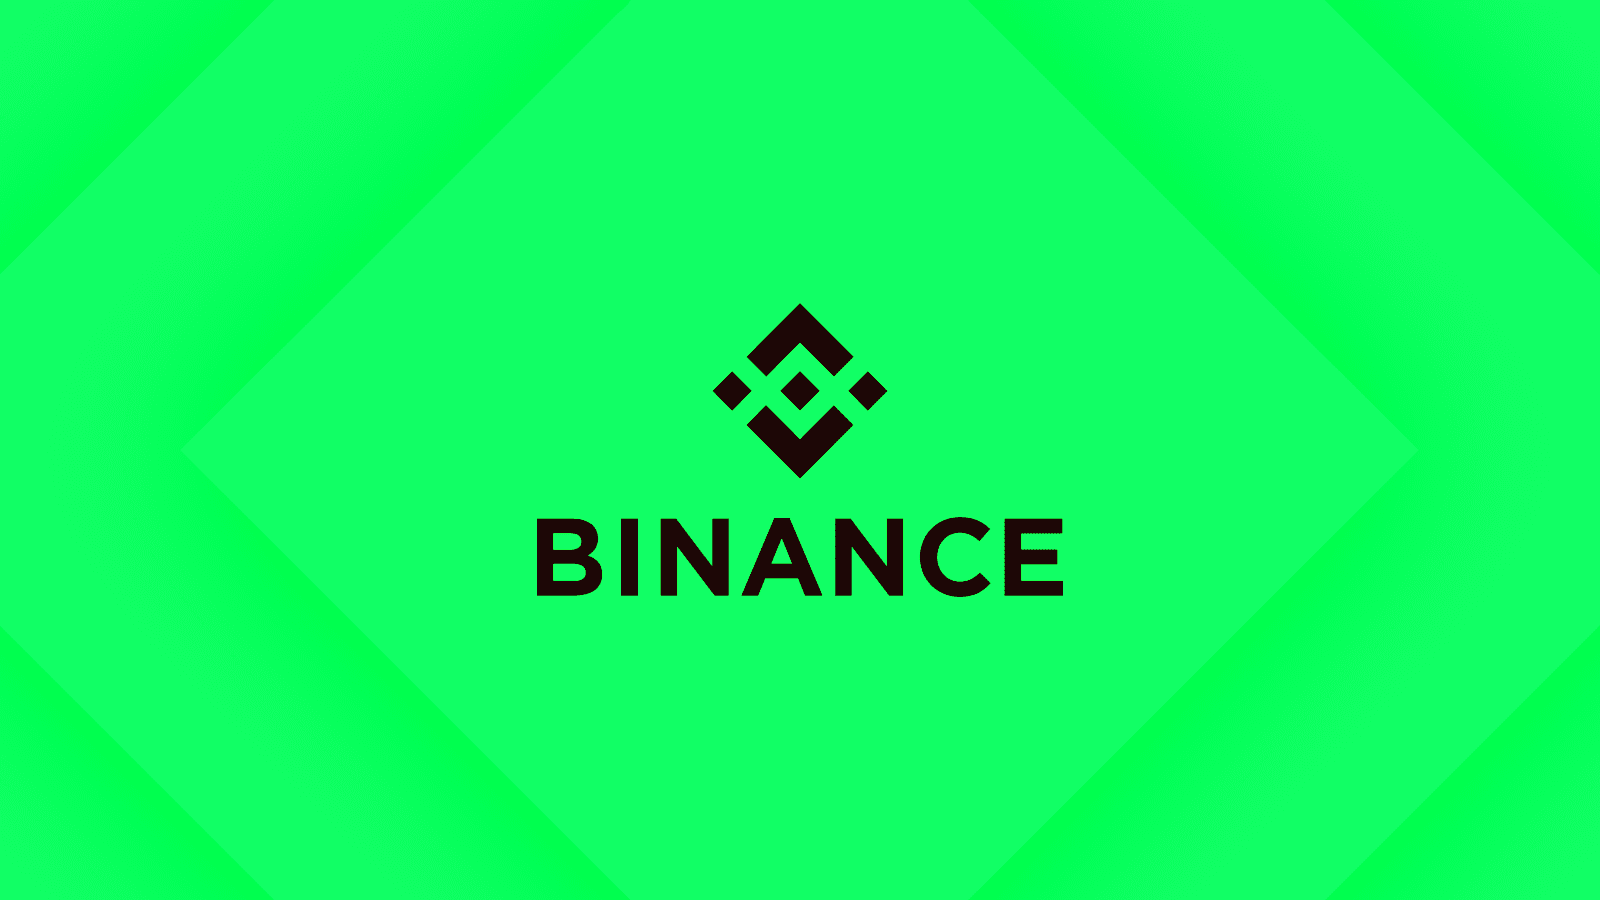 Binance to discontinue all Nigerian naira services from March 8 amid escalating regulatory standoff in Africa's biggest economy.